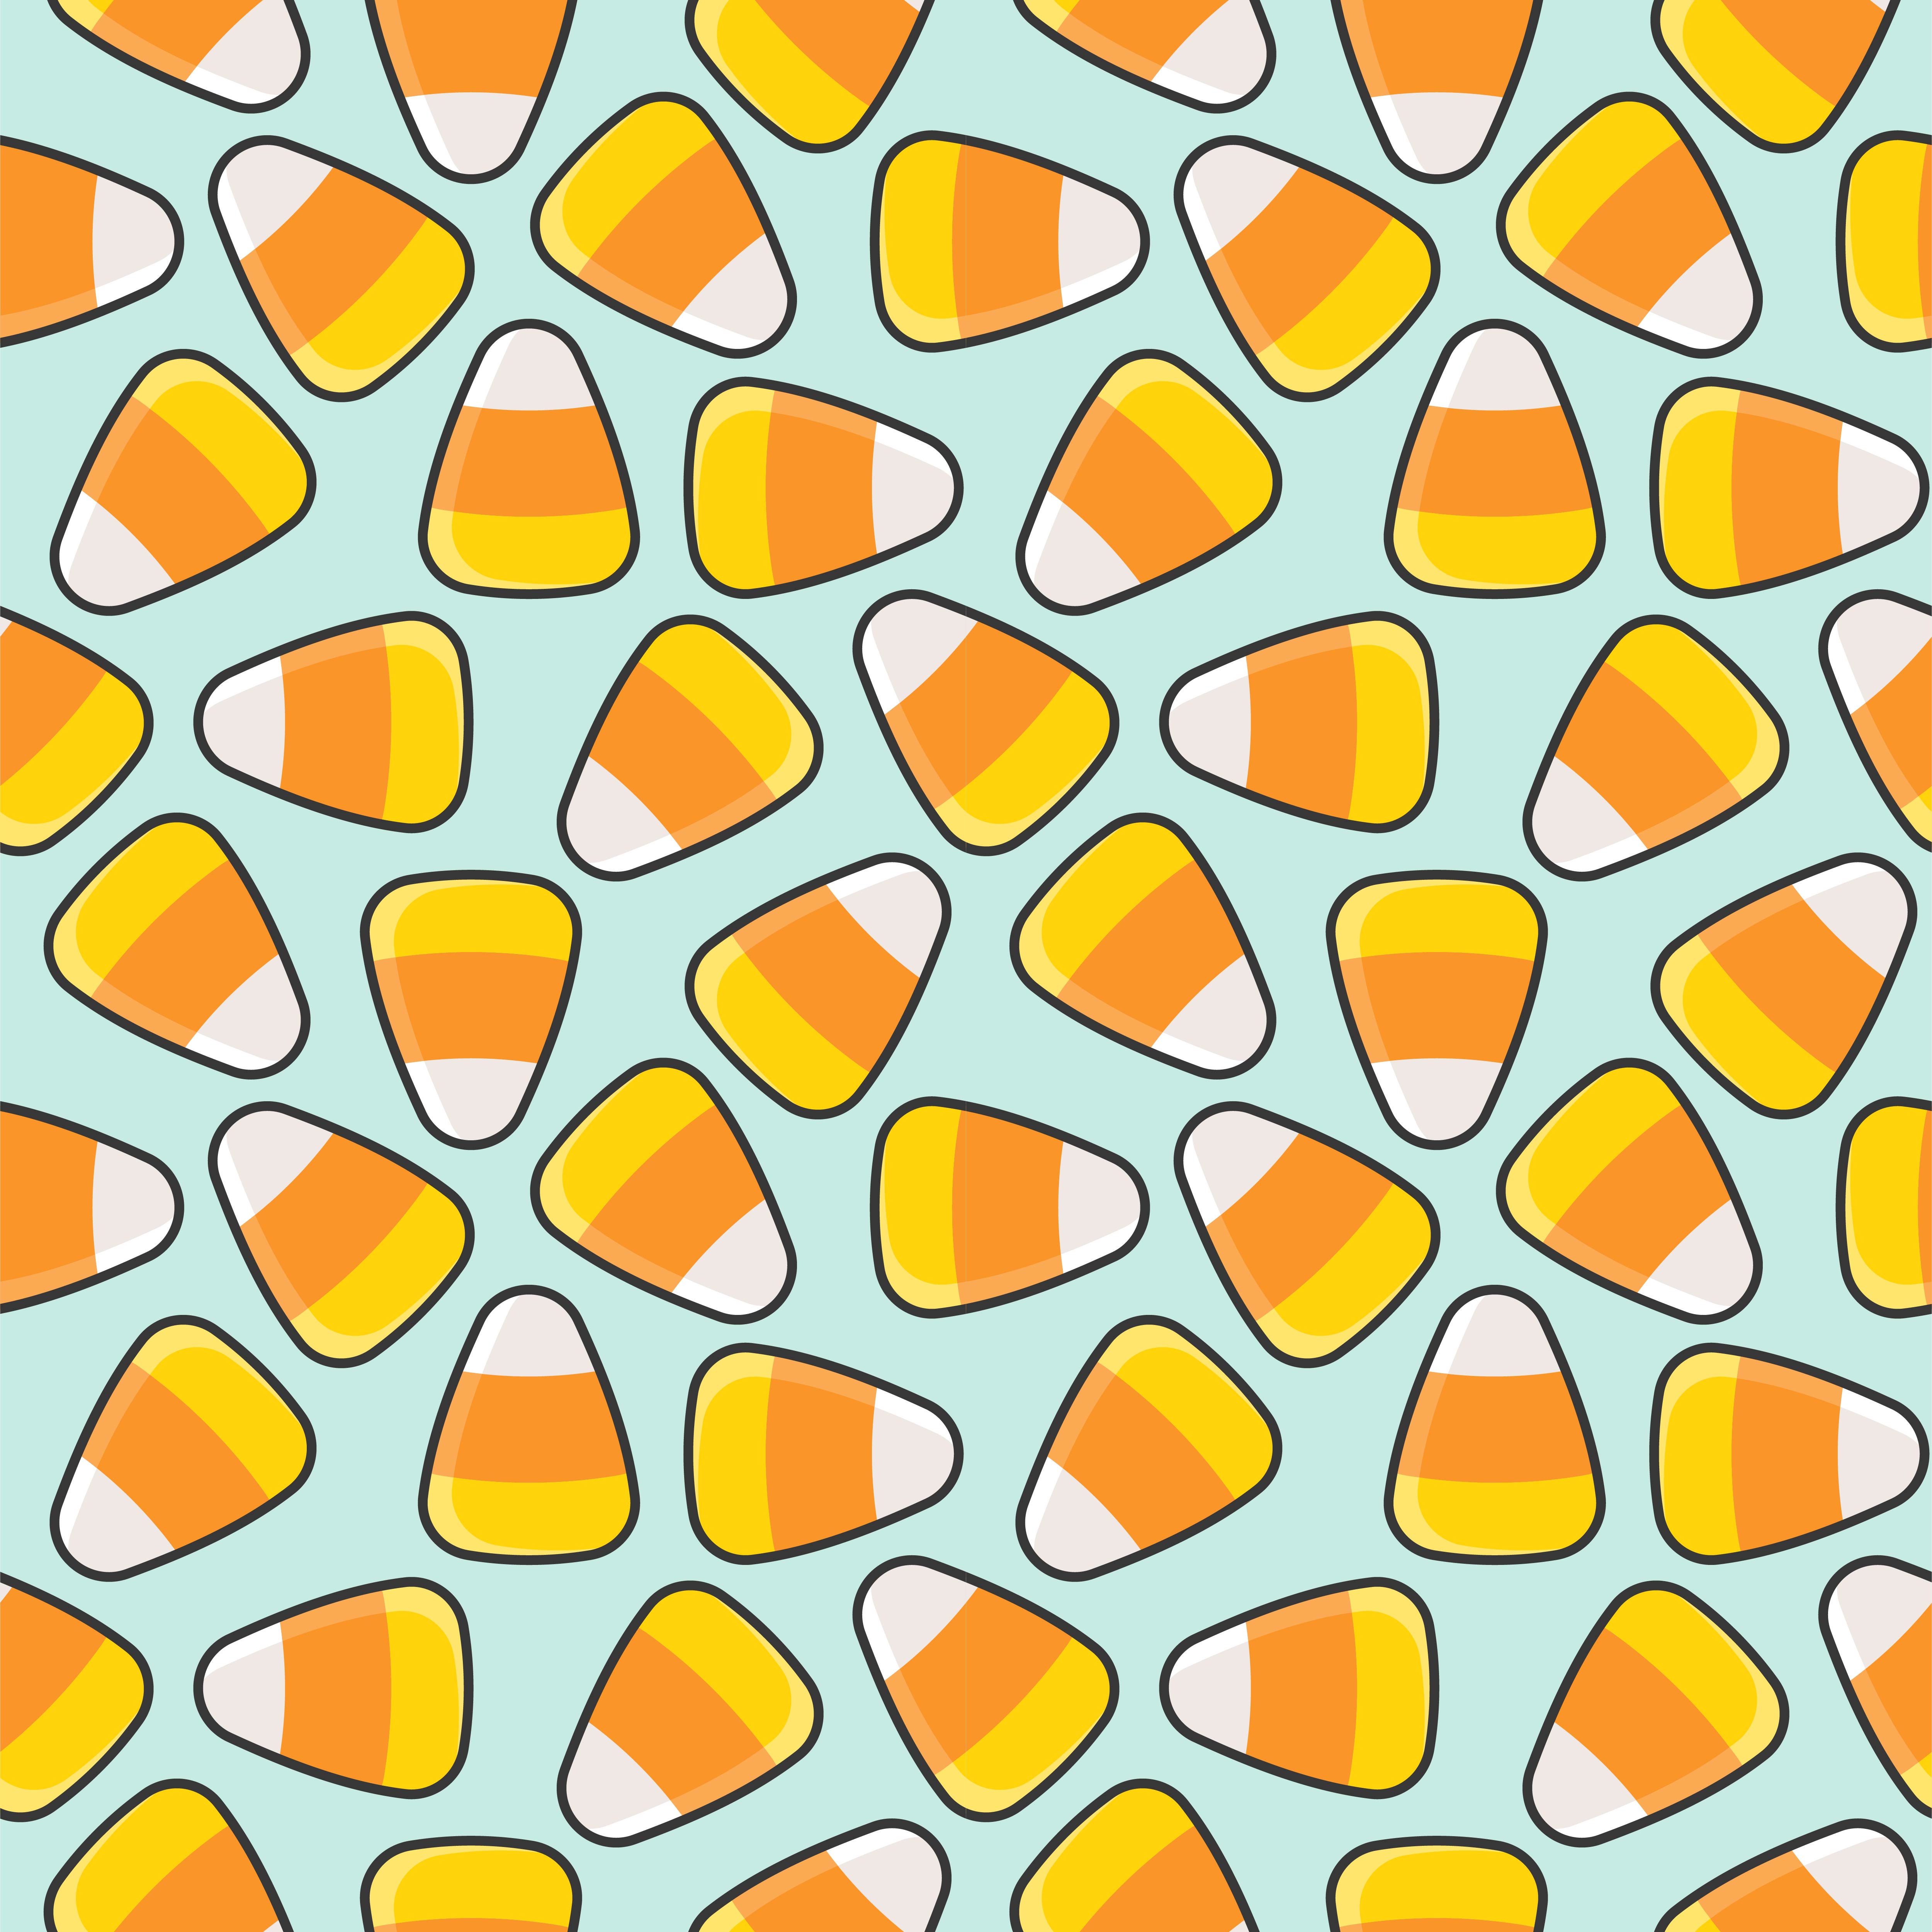 Candy corn seamless pattern for halloween background or wallpaper Free Vectors, Clipart Graphics & Vector Art